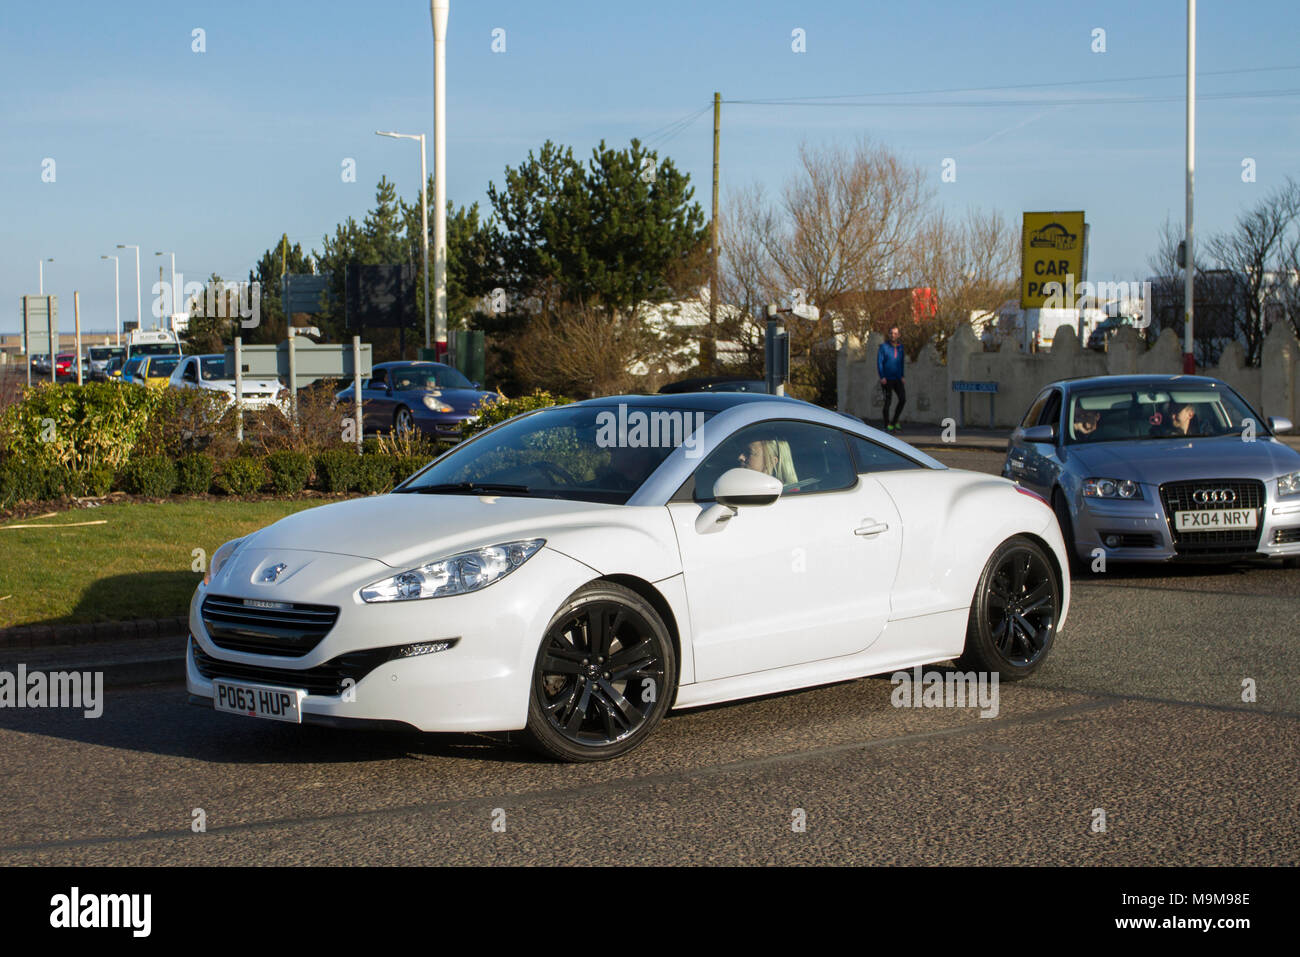 Peugeot RCZ GT THP Auto; North-West Supercar event as cars and tourists arrive in the coastal resort. SuperCars are bumper to bumper on the seafront esplanade as classic & vintage car enthusiasts enjoy a motoring day out. Stock Photo